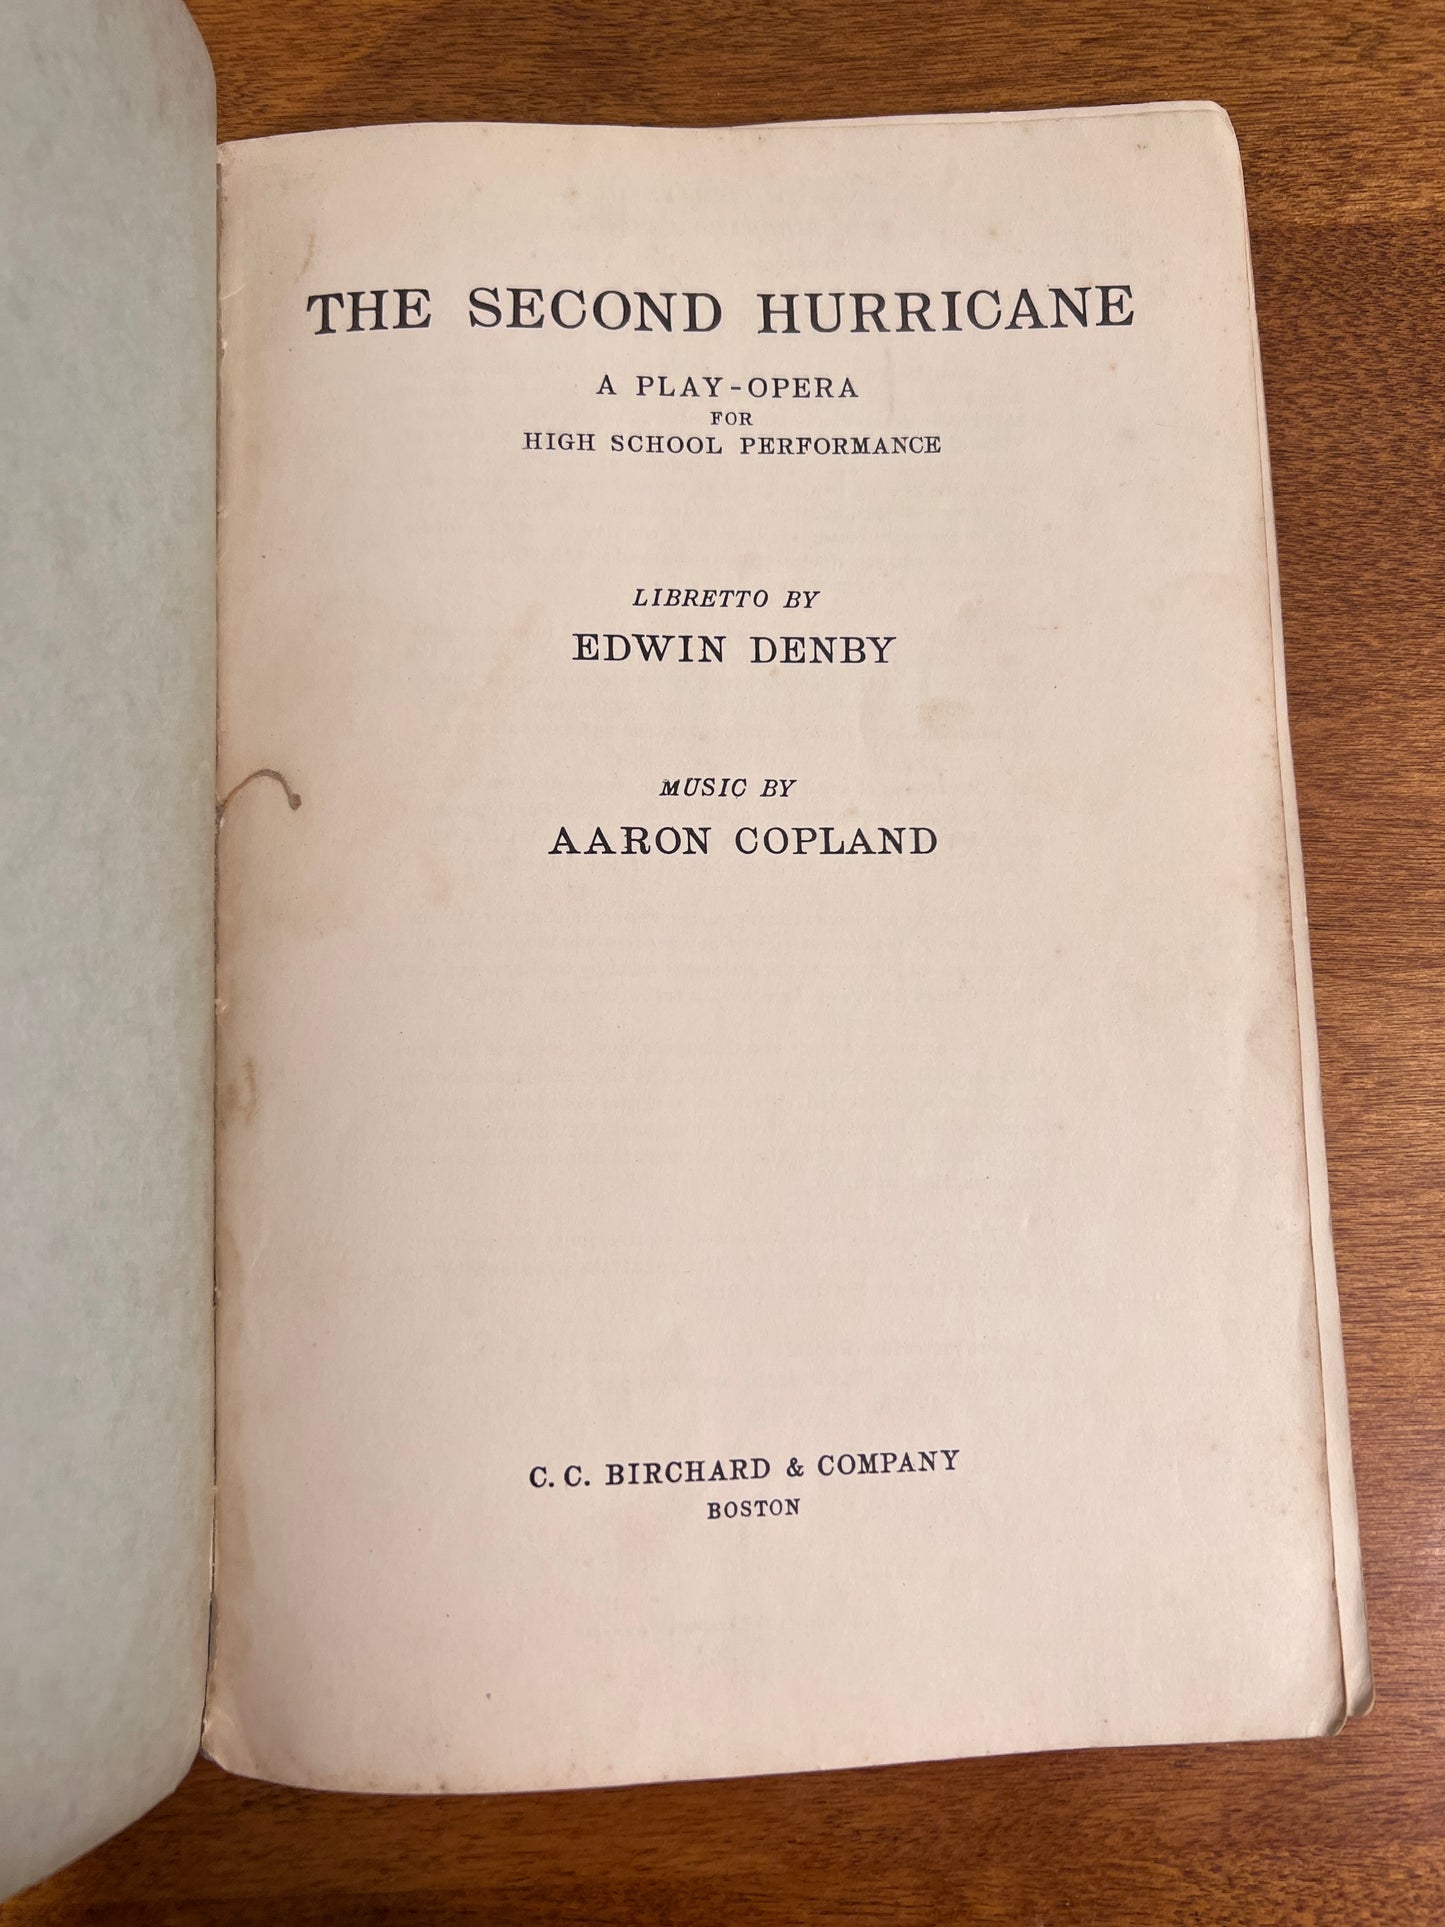 The Second Hurricane A Play Opera in Two Acts by Edwin Denby, 1938